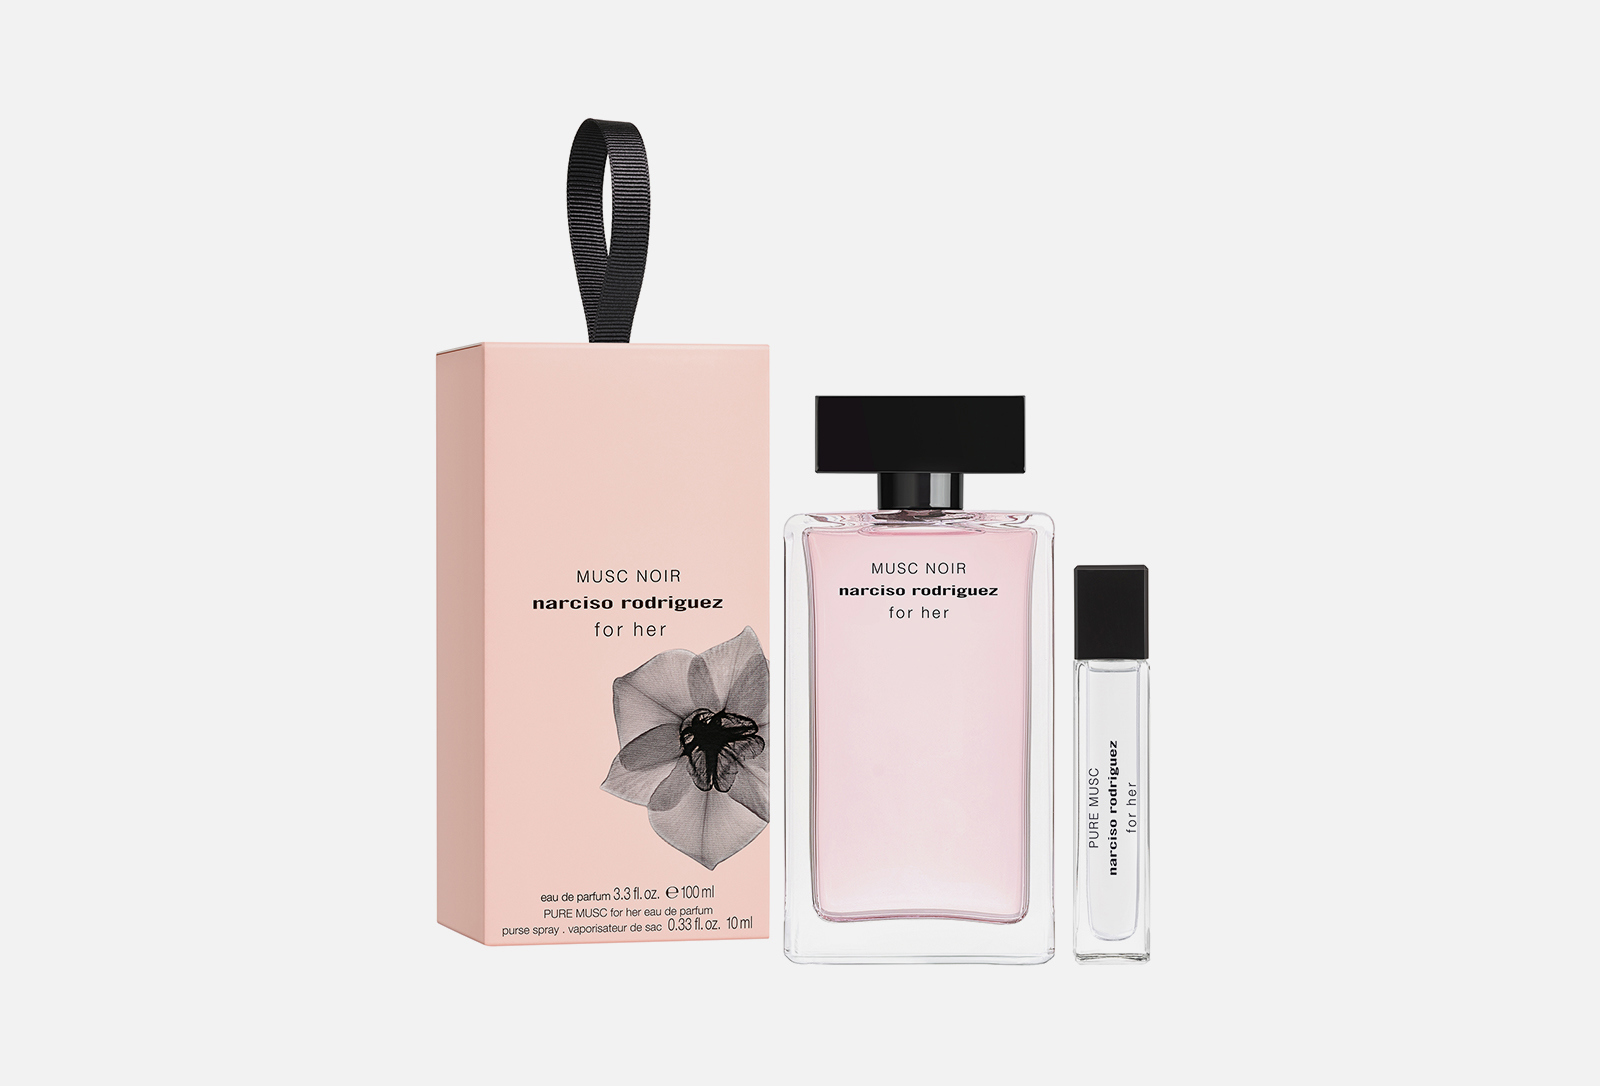 Narciso rodriguez musc noir rose. (Narciso Rodriguez) for her Musc Noir парфюмерная вода 100мл тестер. Musc Noir Rose for her Narciso Rodriguez 100. Набор нарциссо Родригес. Narciso Rodriguez Musc Noir 10 ml.